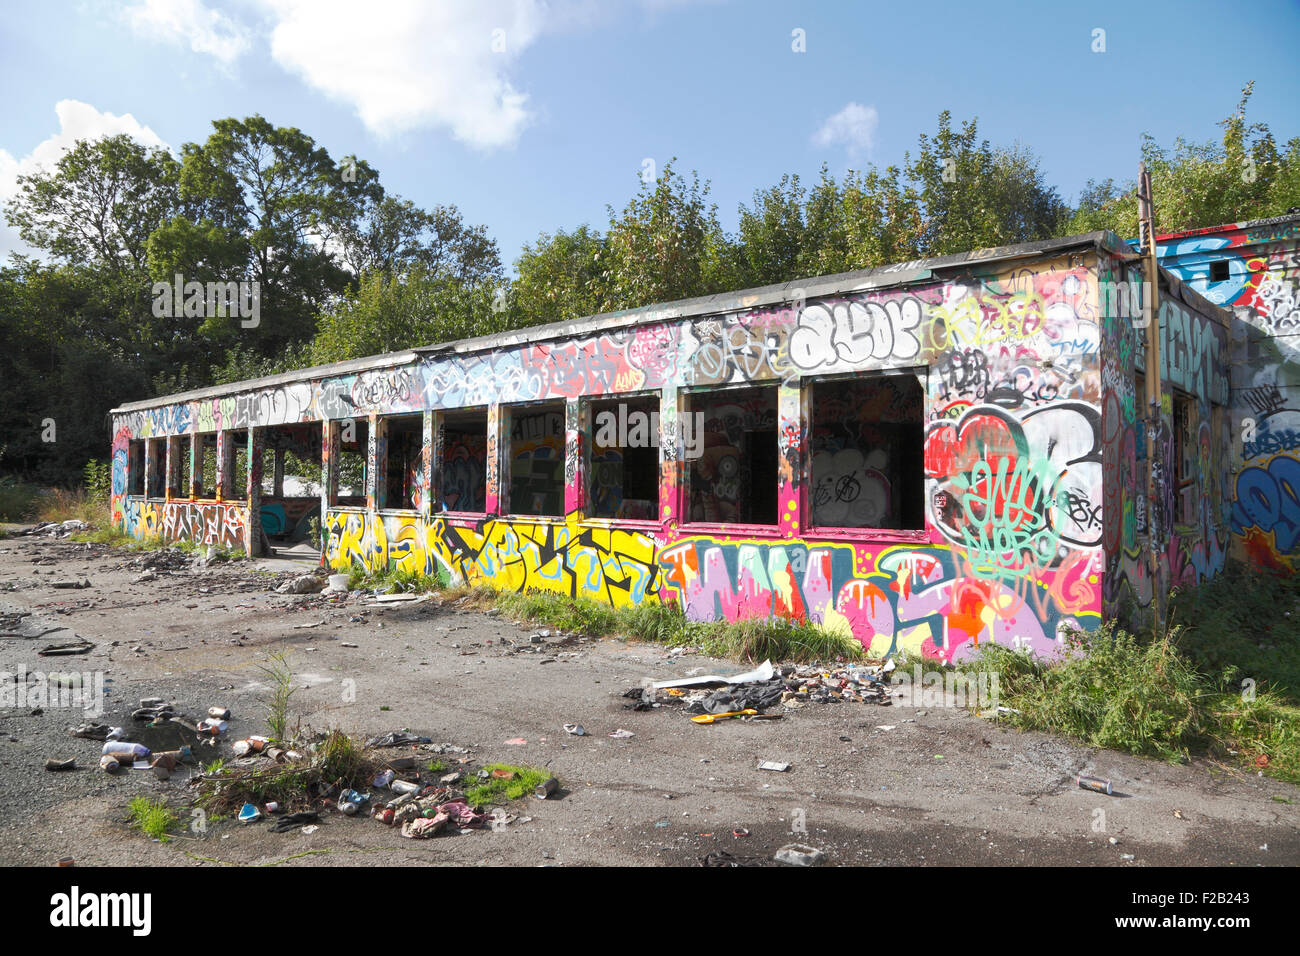 Copenhagen, Denmark. 15th  September, 2015. Restaurant Noma will close right after New Year's Eve 2016 to re-open in 2017 in a new restaurant with an urban farm. This old naval mine depot full of graffiti and street art in a listed area of historic defences, close to the free town Christiania, earlier also housing the Royal Danish Academy of Fine Arts, School of Architecture, will become the building site for the new restaurant. Plans are to put a greenhouse on the roof, replace the asphalt with good, fresh soil, and place a floating field on a raft in the lake. Credit:  Niels Quist/Alamy Live Stock Photo